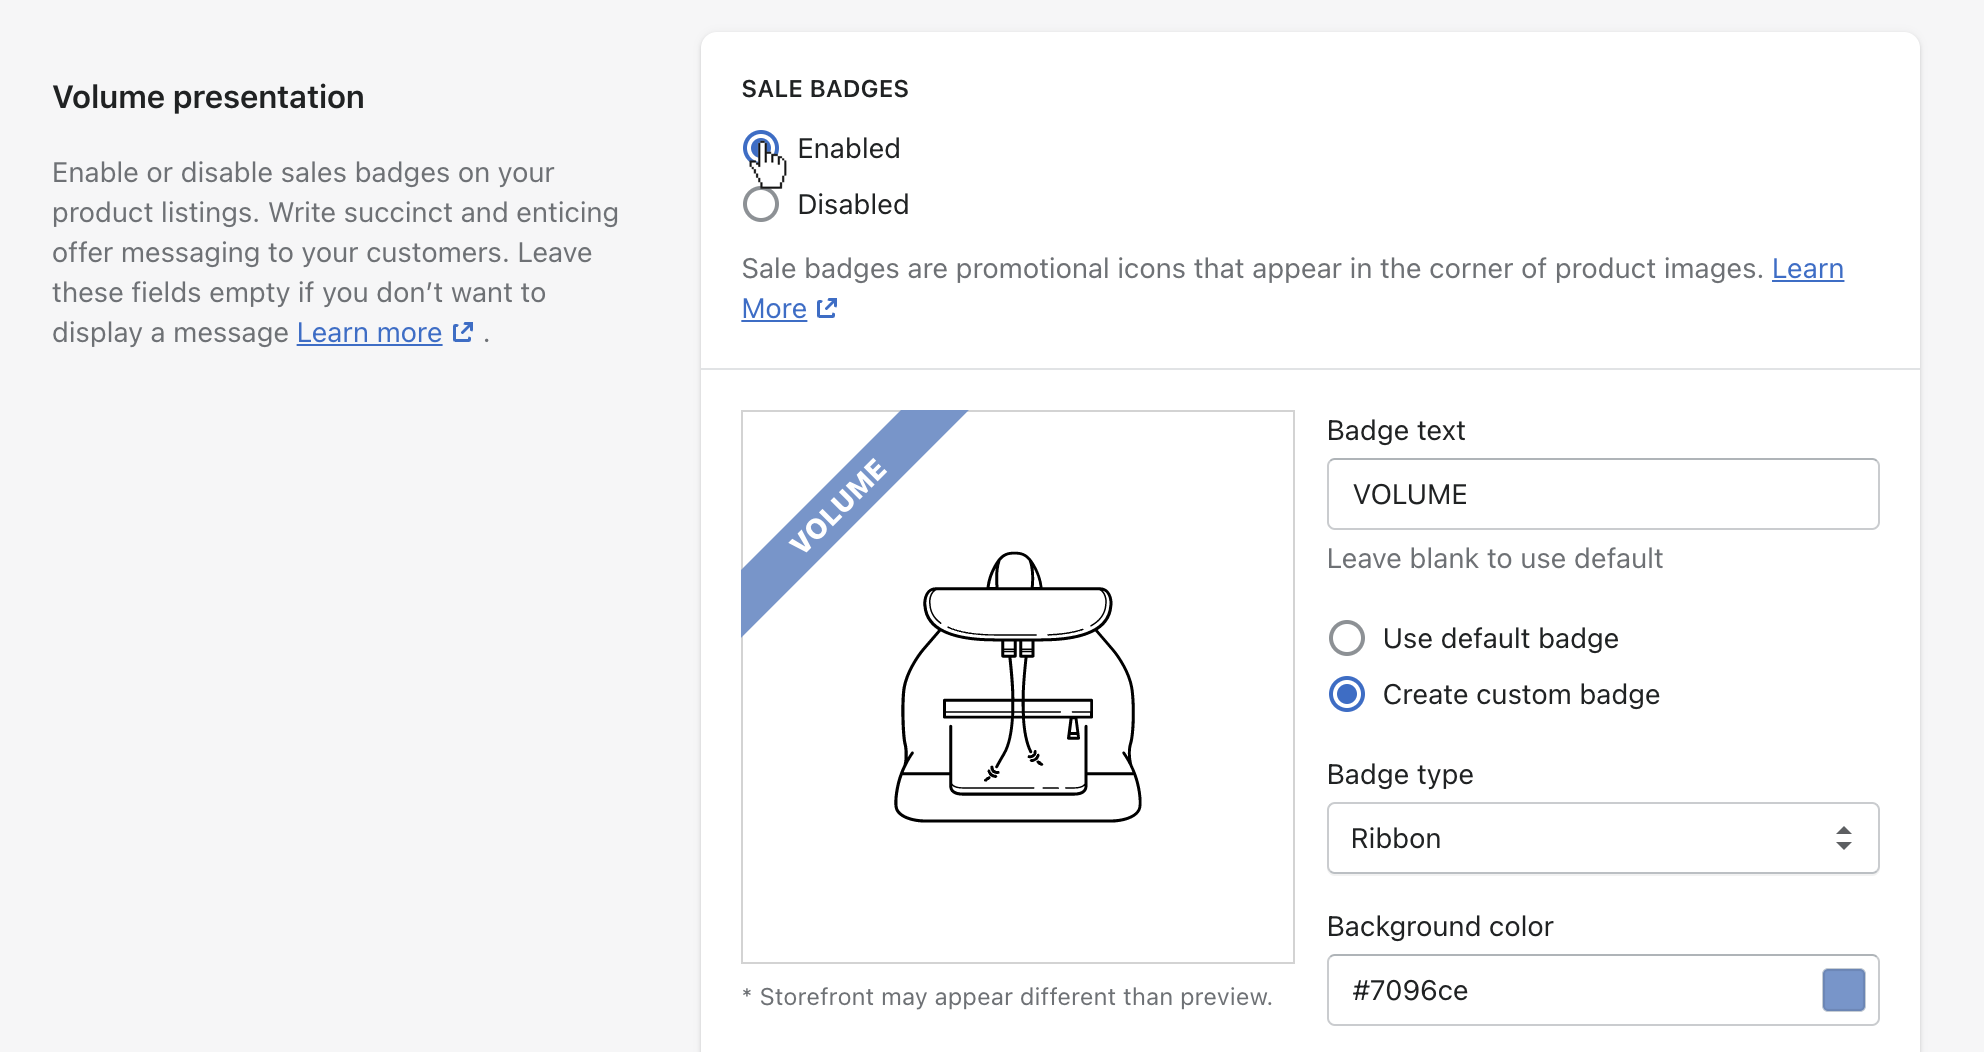 A setting within a Volume offer to turn sale badges on or off.